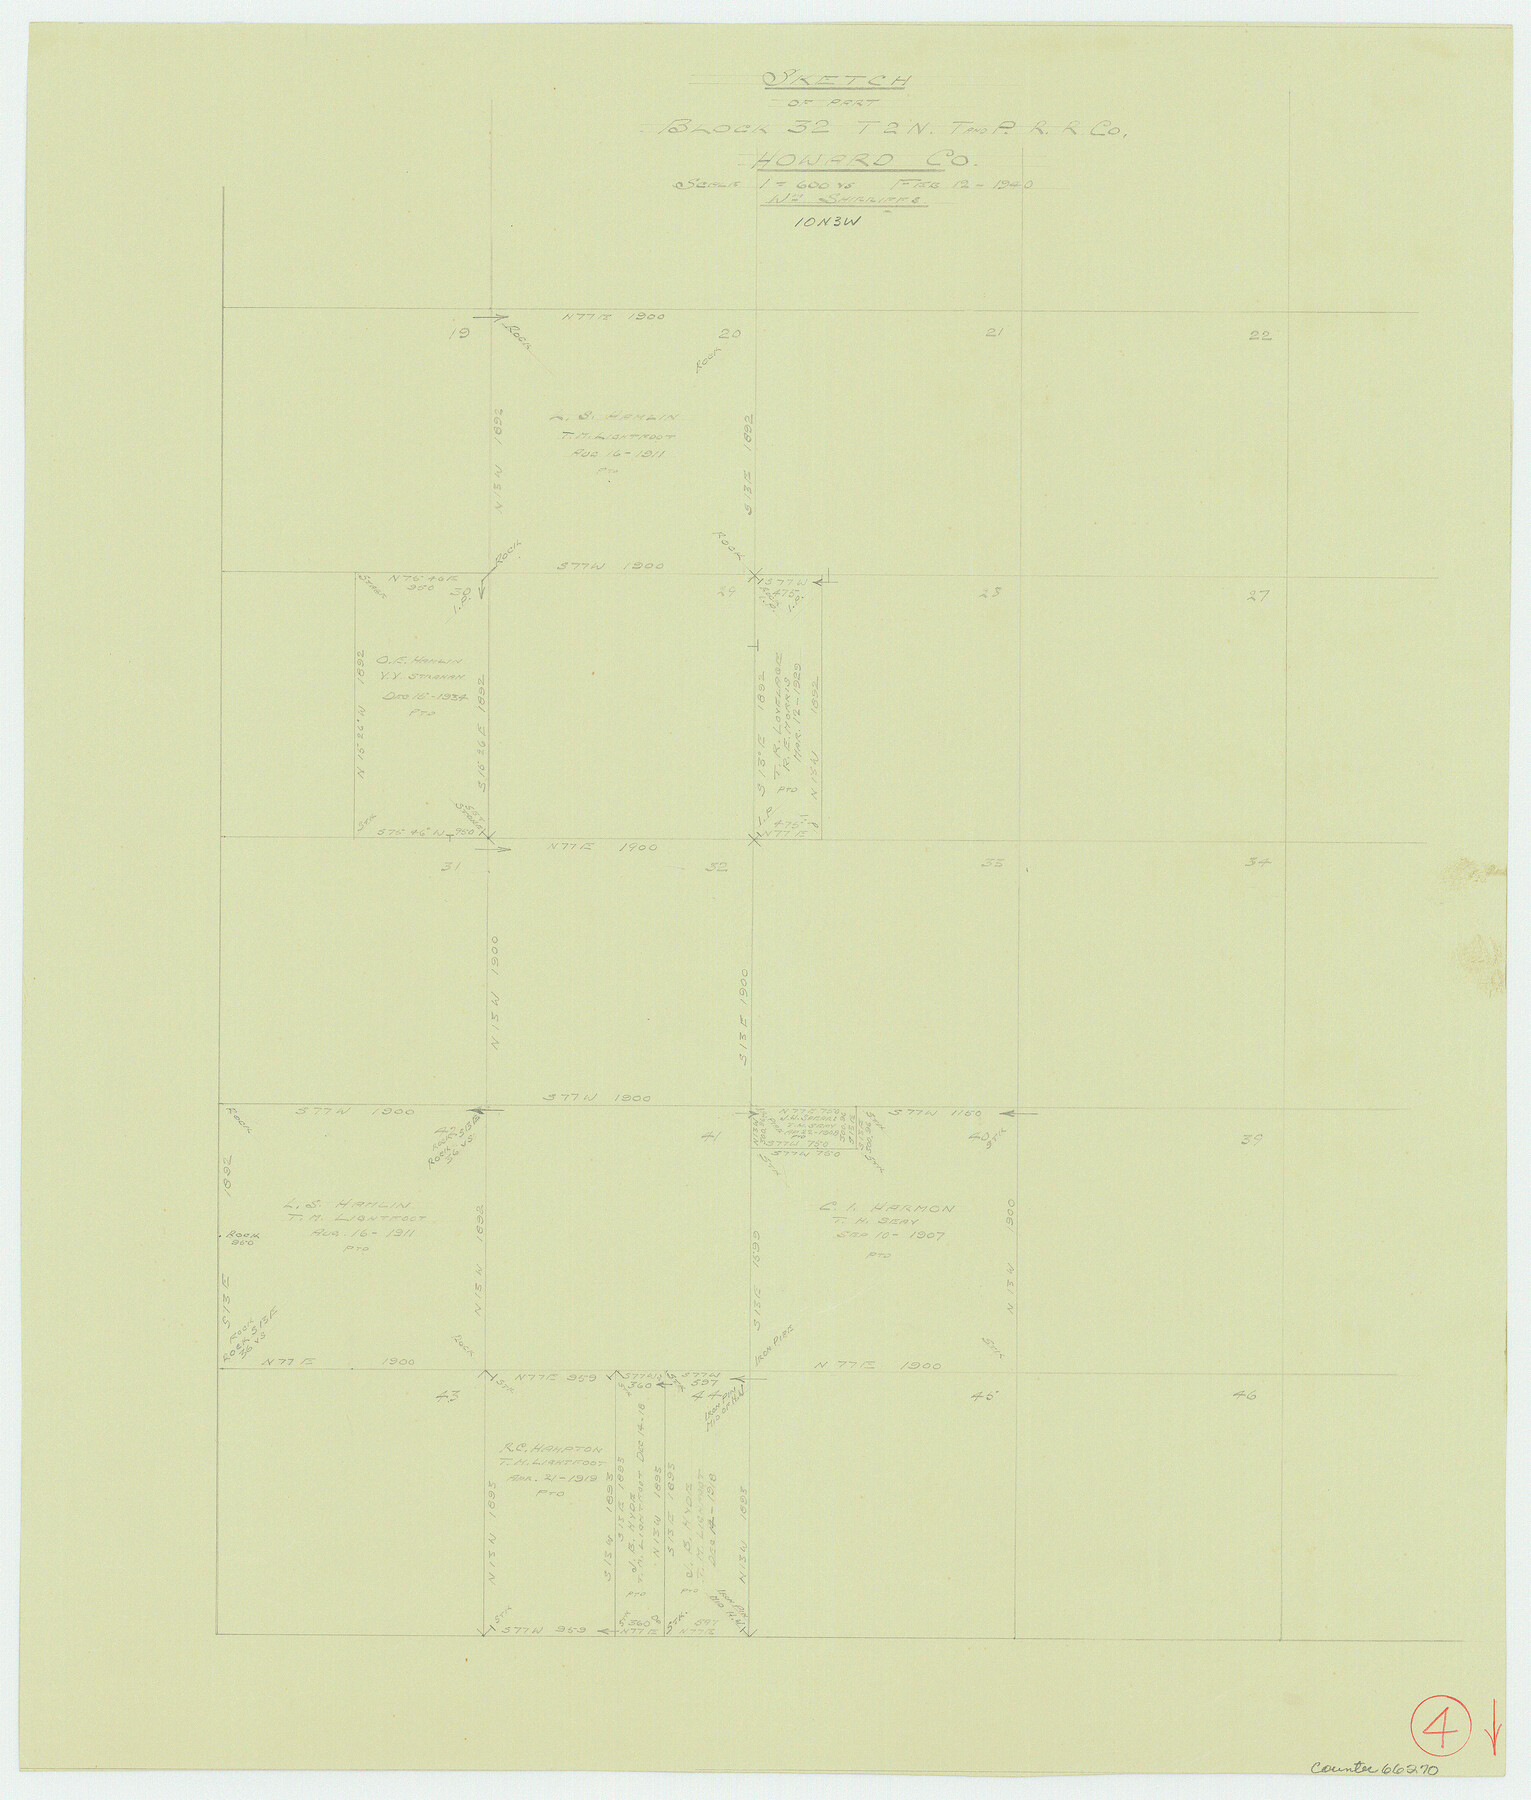 66270, Howard County Working Sketch 4, General Map Collection